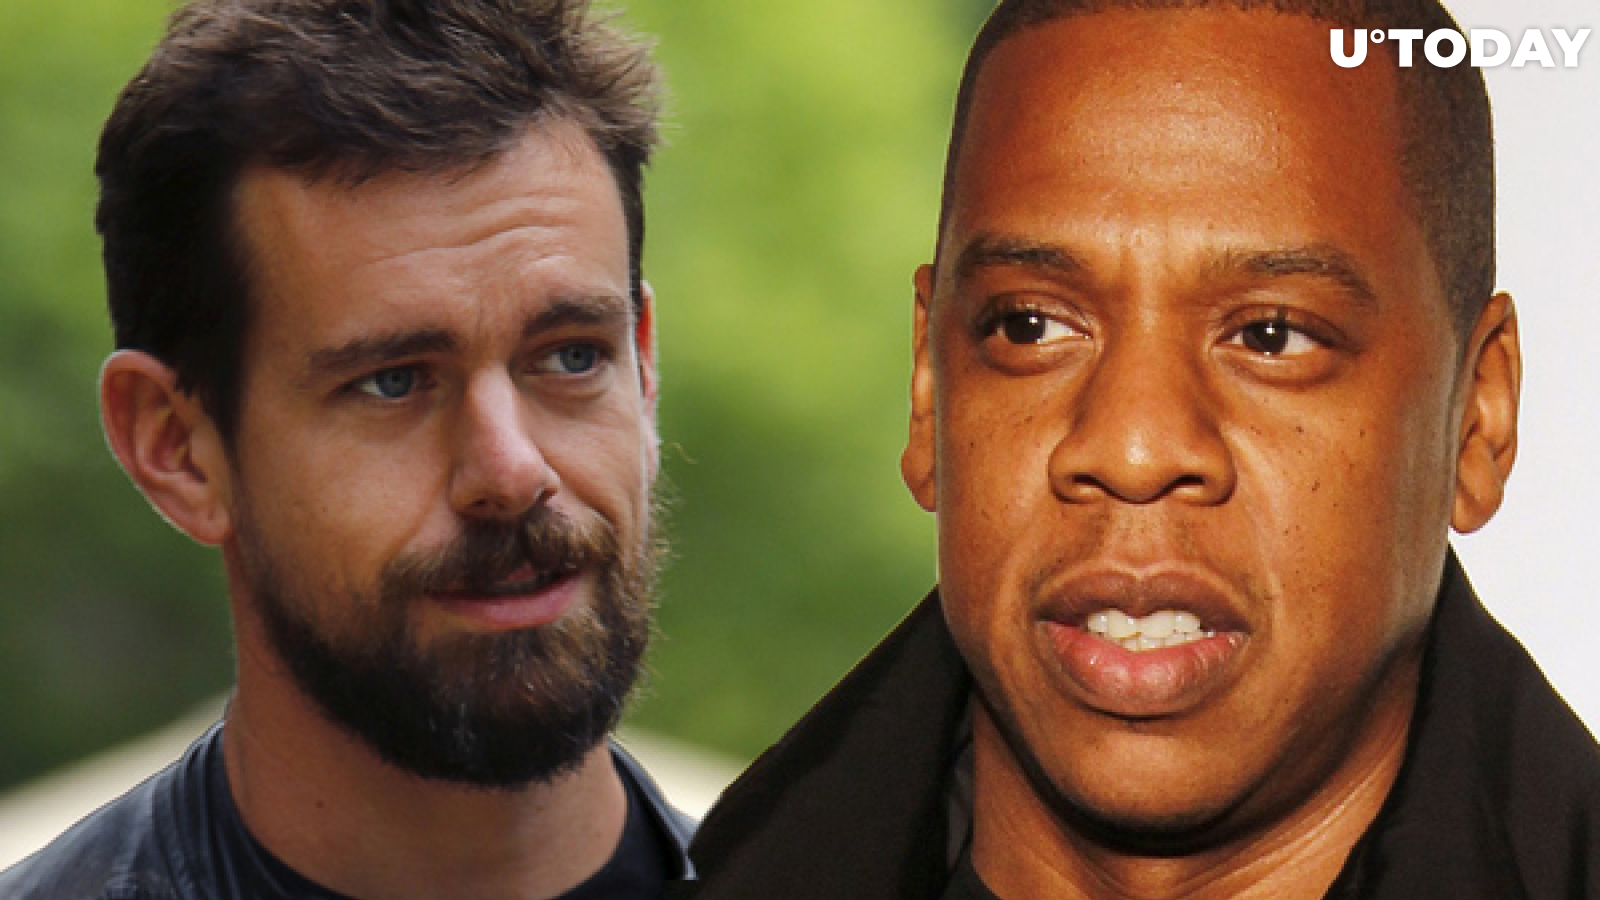 Jack Dorsey and Rapper Jay-Z to Give $23.6 Million in BTC to New Bitcoin Development Trust